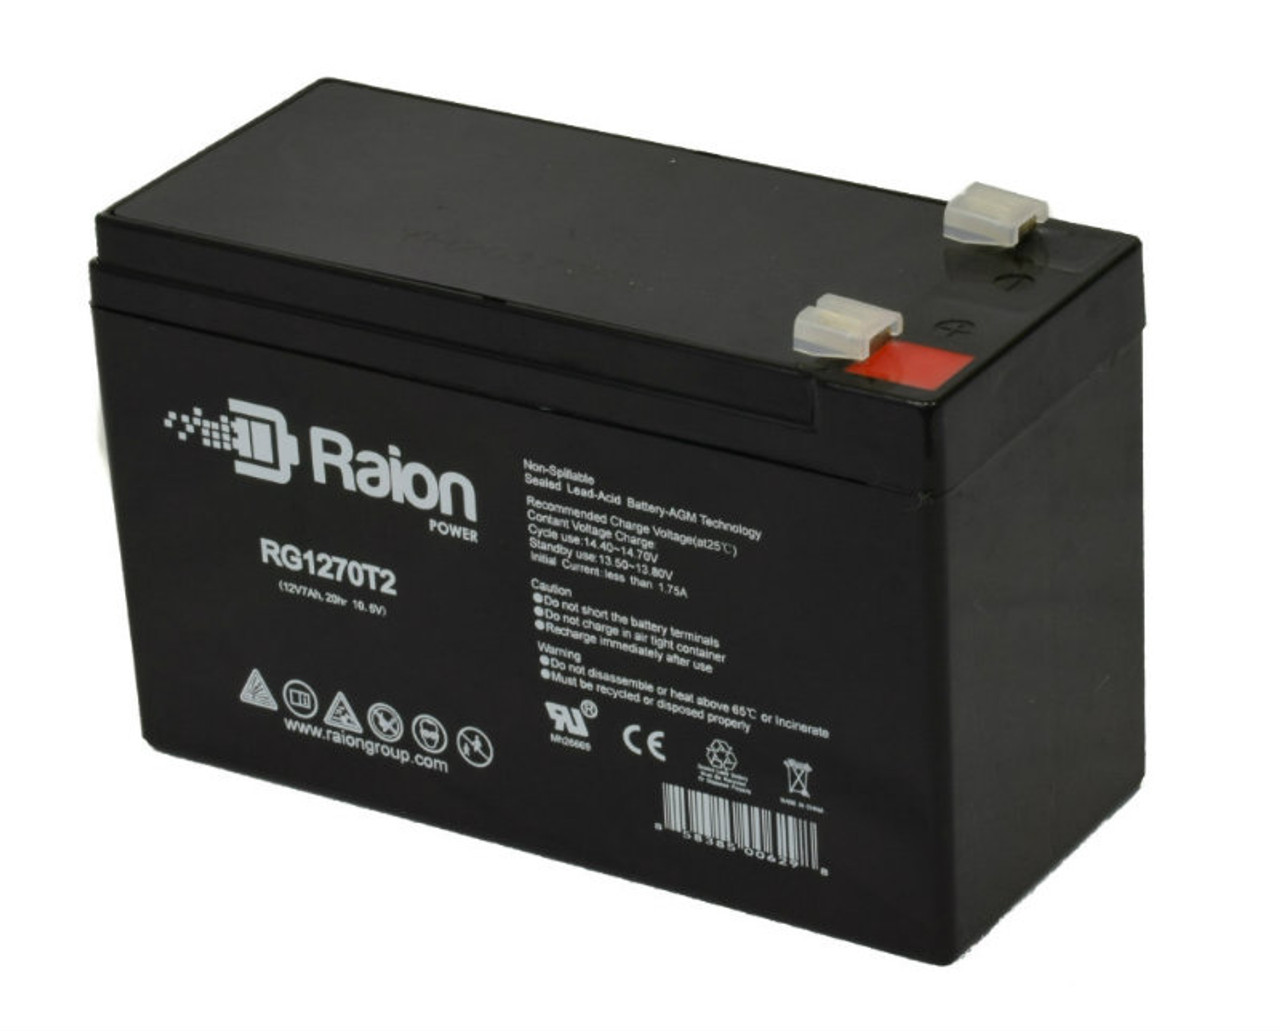 Raion Power RG1270T2 12V 7Ah Rechargeable Battery for Stannah Siena 260 Curved Stairlift